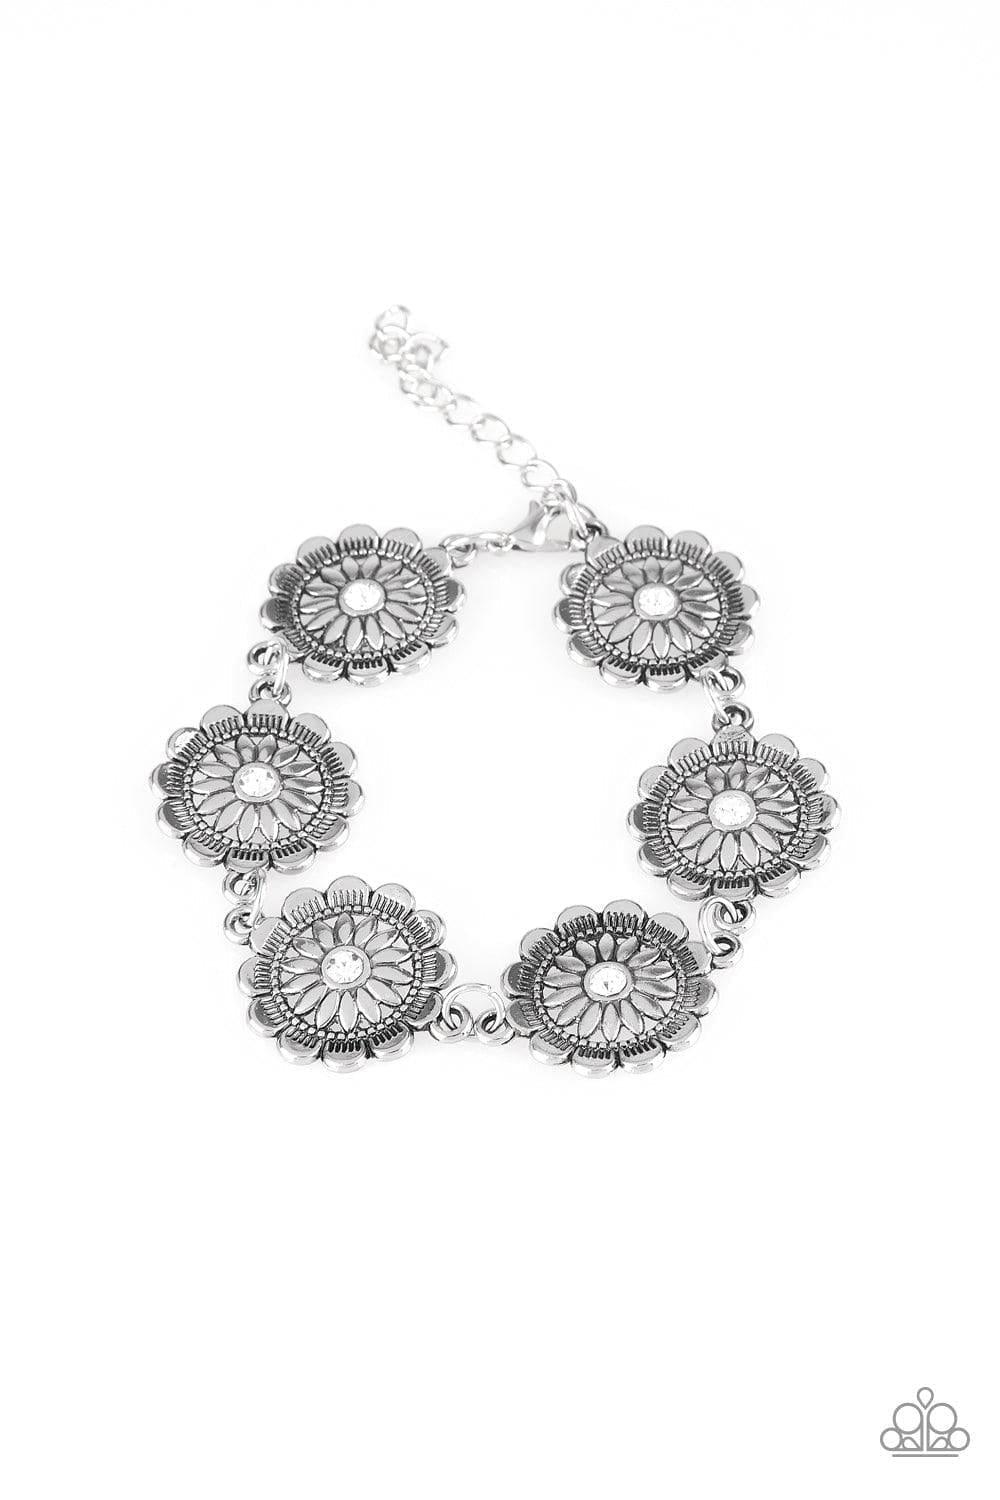 Paparazzi Accessories - Written In The Star Lilies And Funky Flower Child - White Necklace & Bracelet Set - Bling by JessieK